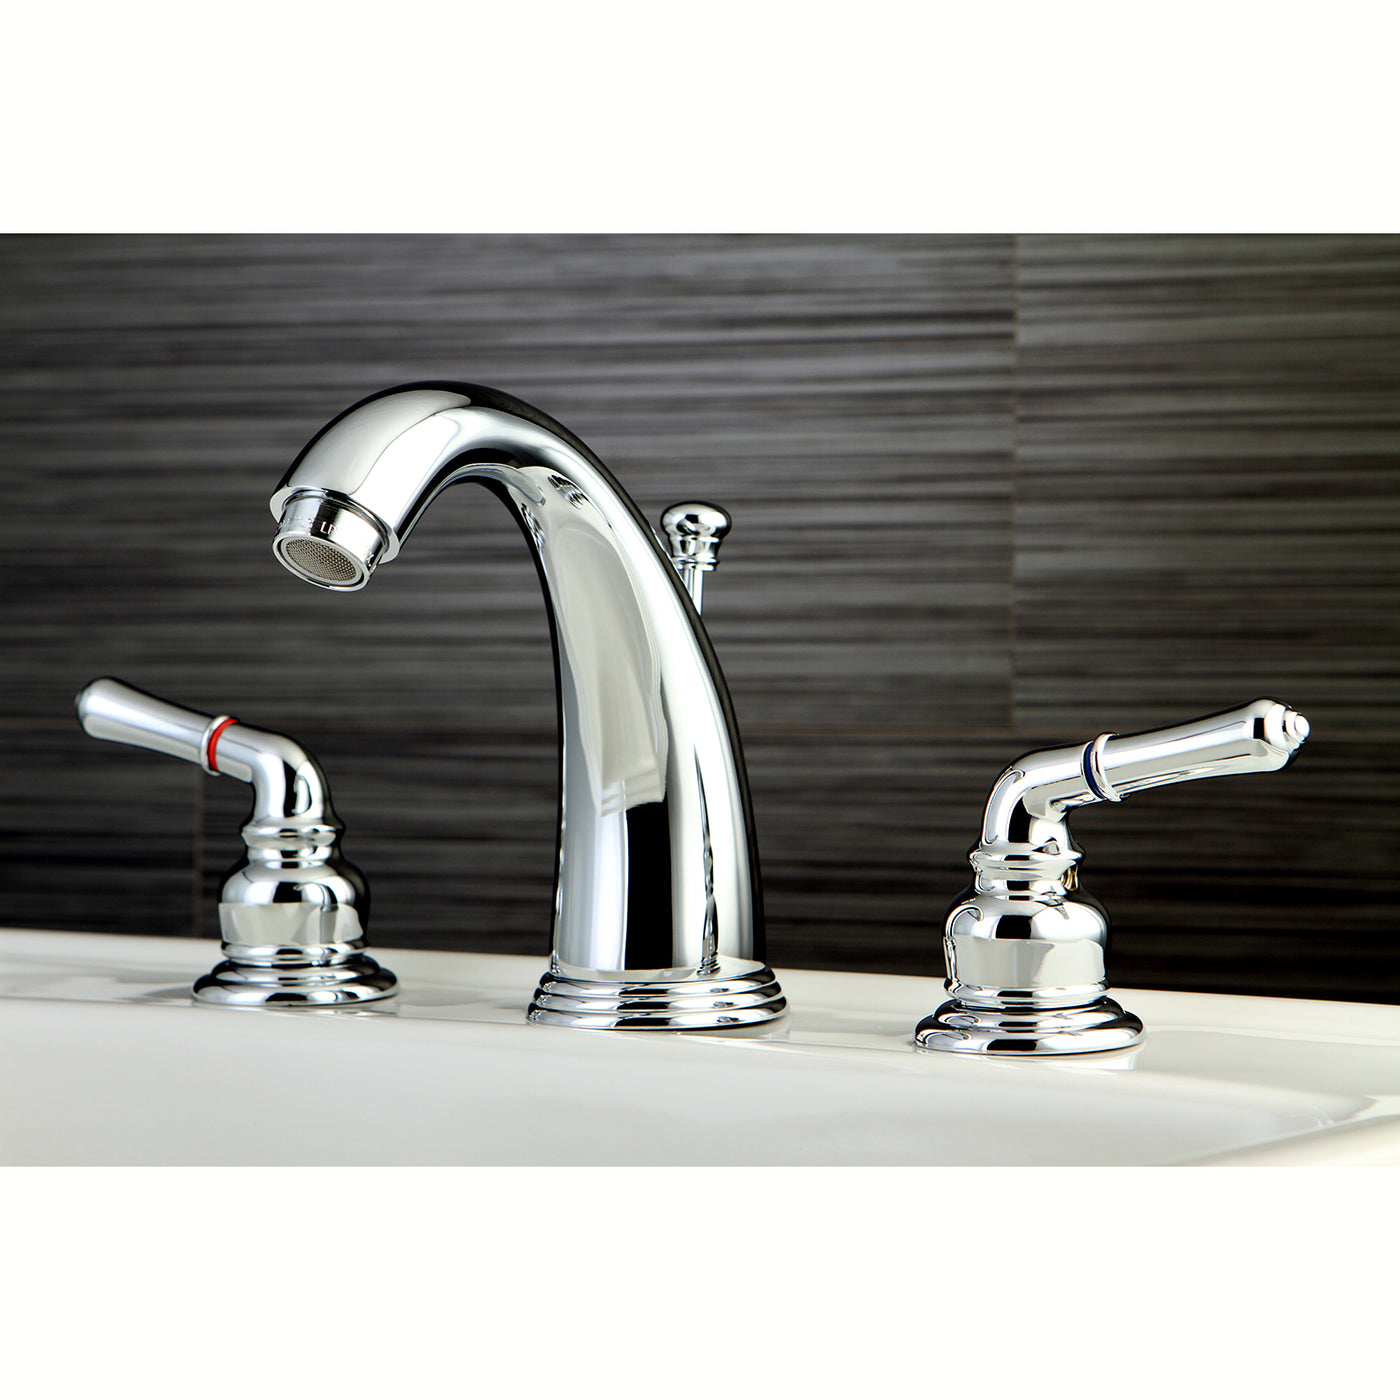 Elements of Design EB981 Widespread Bathroom Faucet with Retail Pop-Up, Polished Chrome